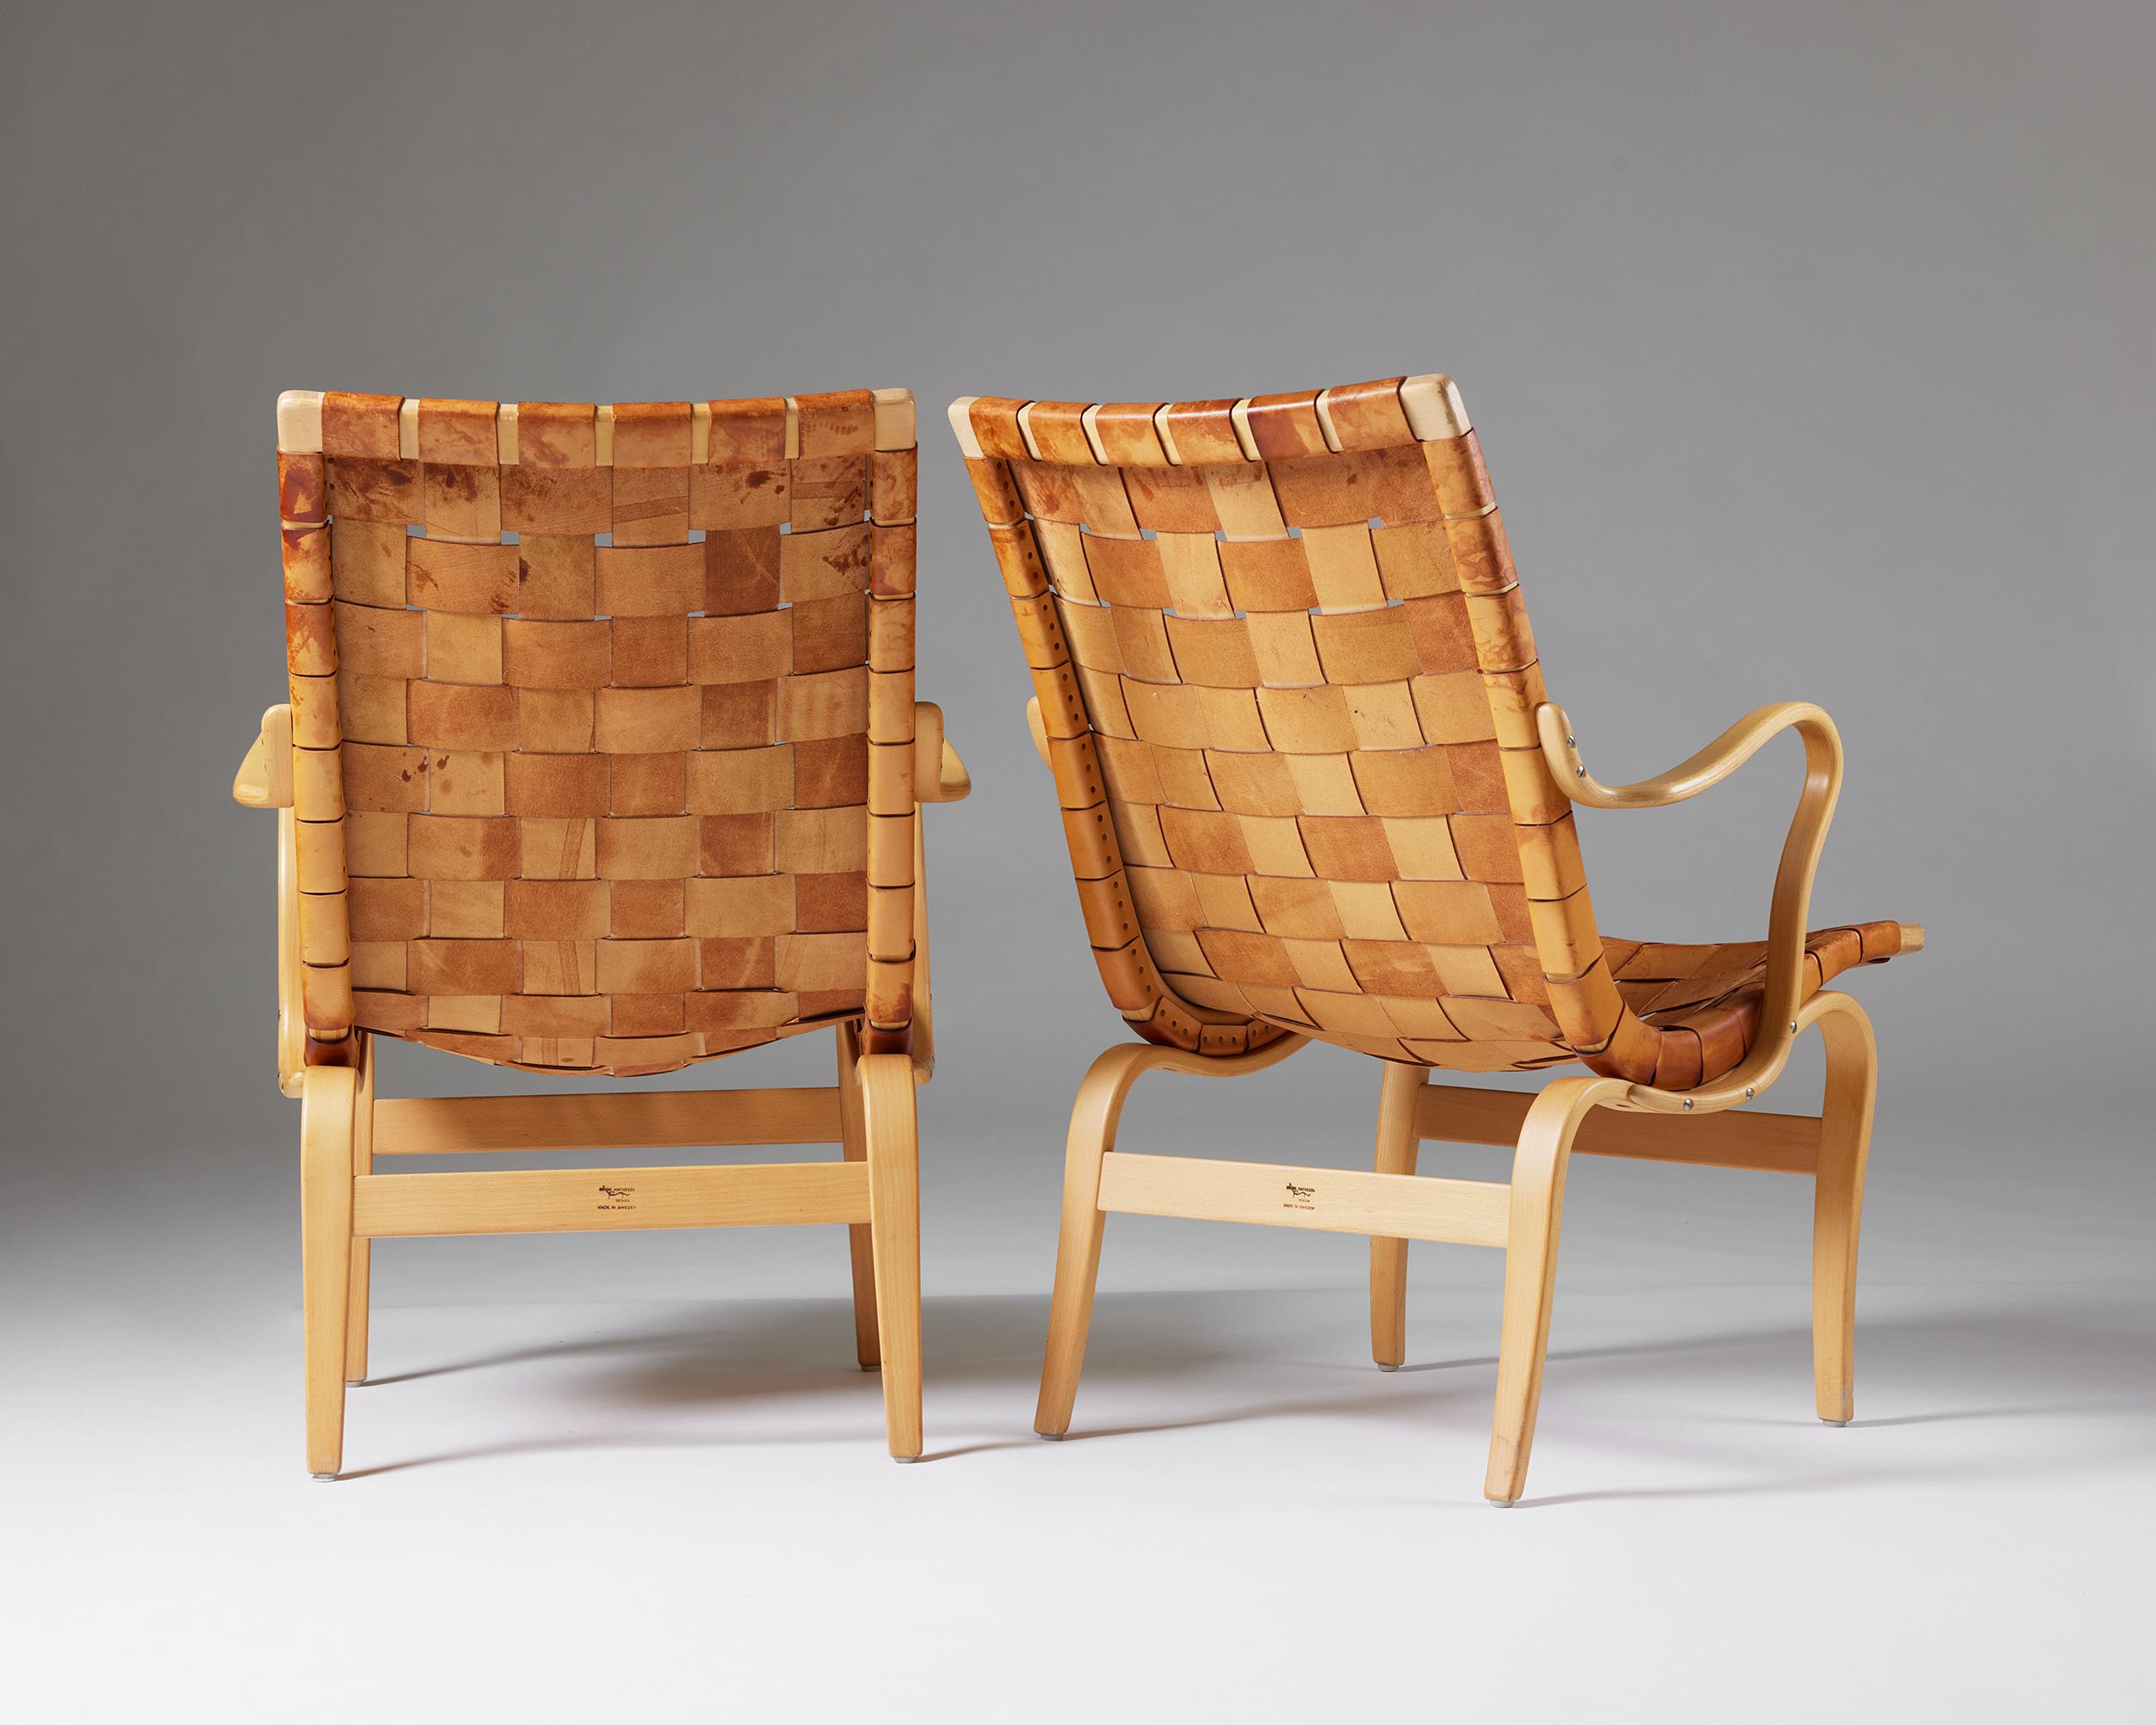 Pair of armchairs ‘Eva’ designed by Bruno Mathsson for Karl Mathsson, Swedish For Sale 3